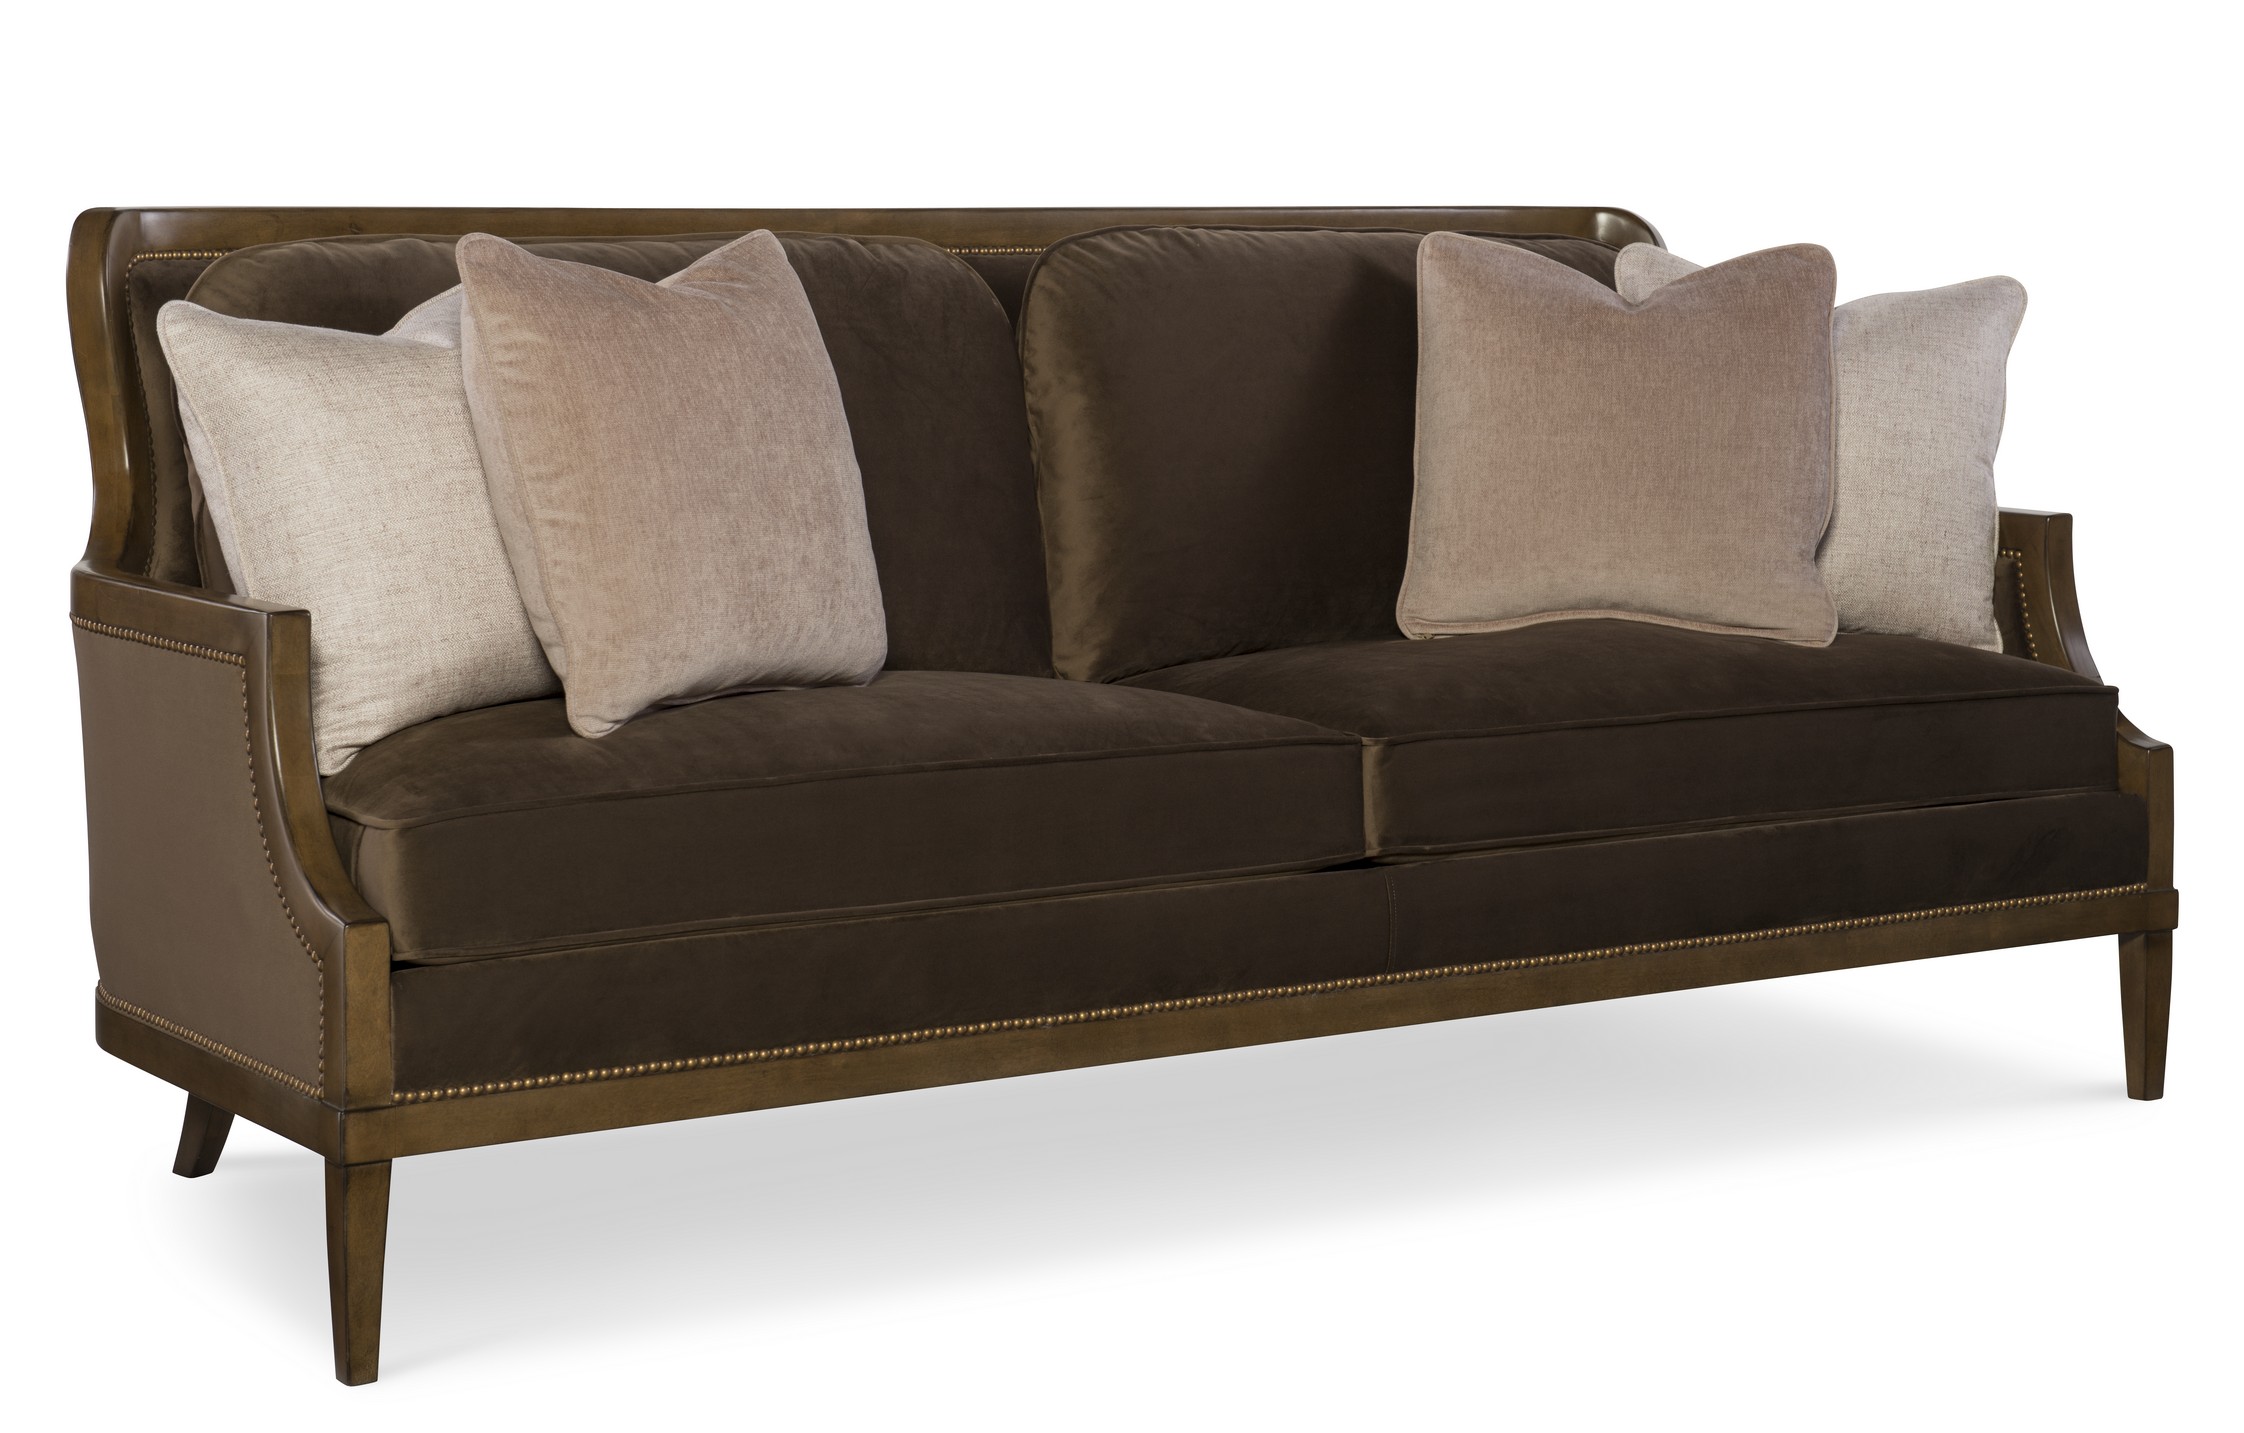 Bradford traditionally designed sofa in a chocolate brown fabric from Fine Furniture